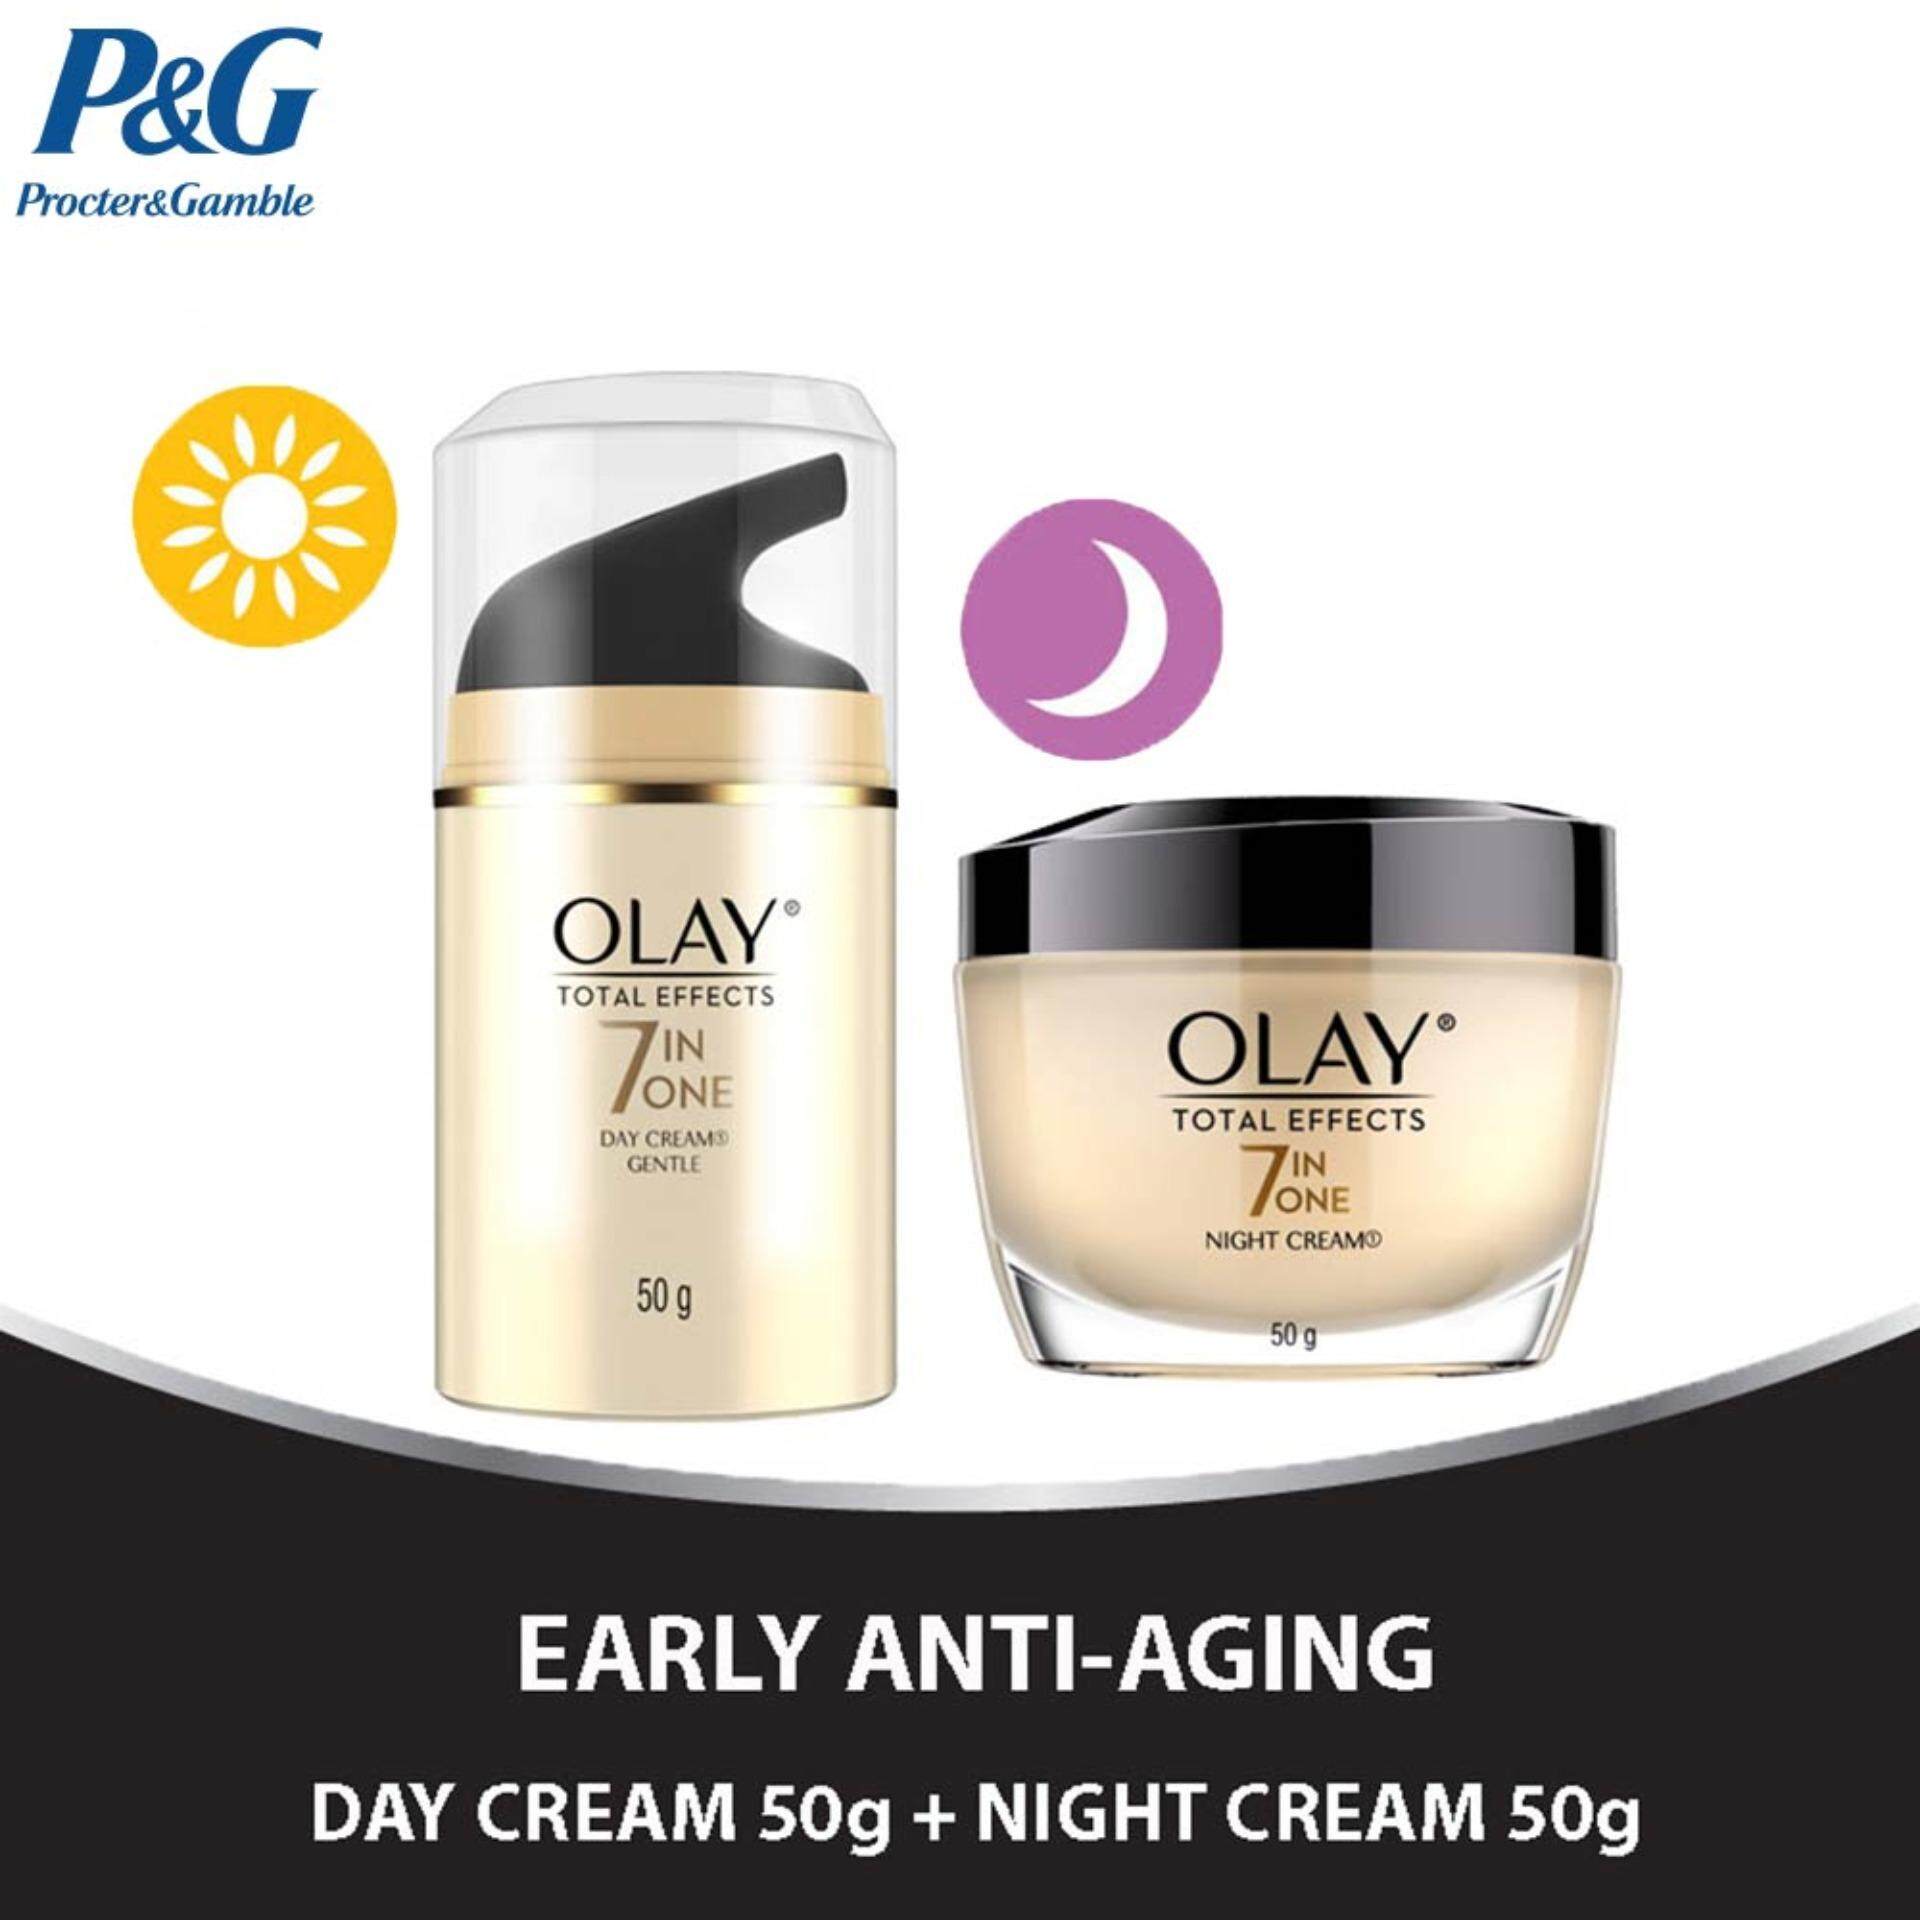 Olay Total Effects 7 In One Day and Night Cream Set